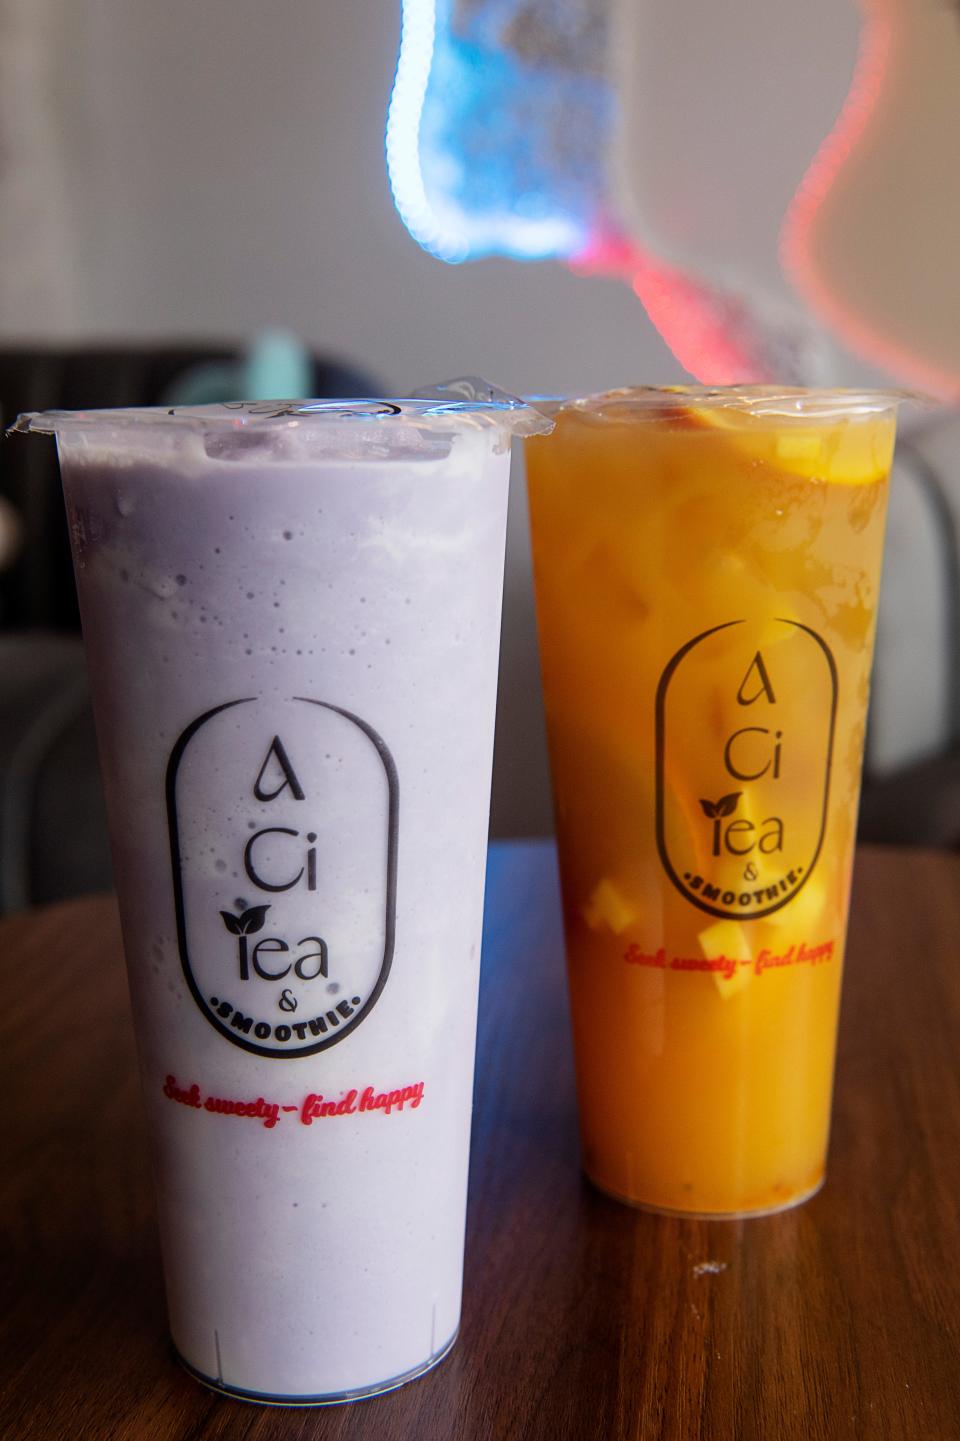 A Taro Snow, left, and Hawaii Fruit Tea from A Ci Tea in Asheville.